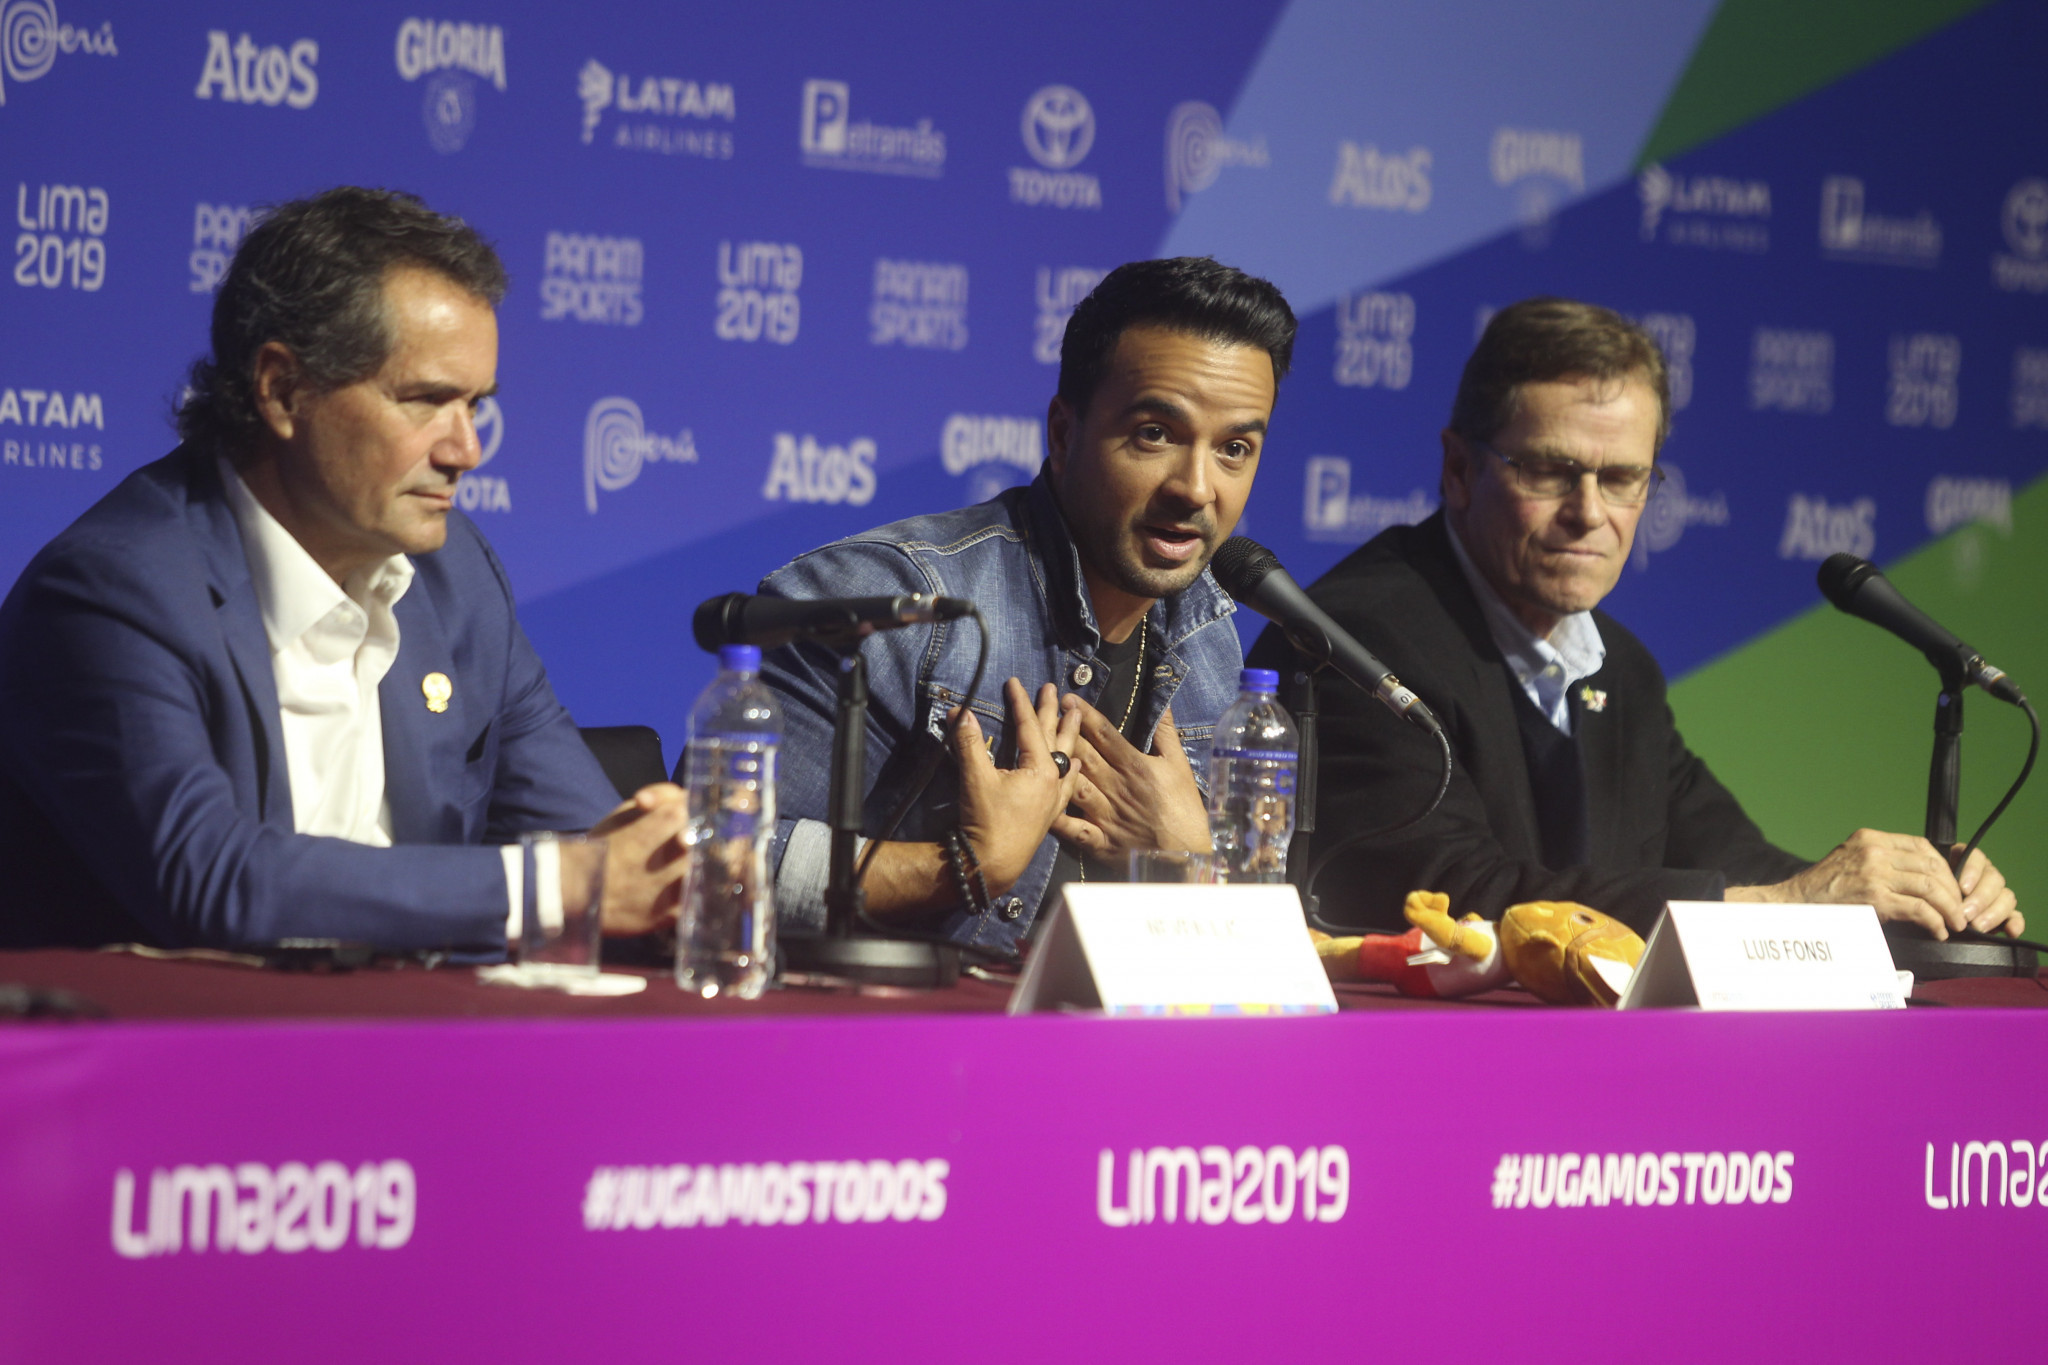 Luis Fonsi attracted a large crowd to a press conference in the run-up to the Lima 2019 Pan American Games ©Lima 2019